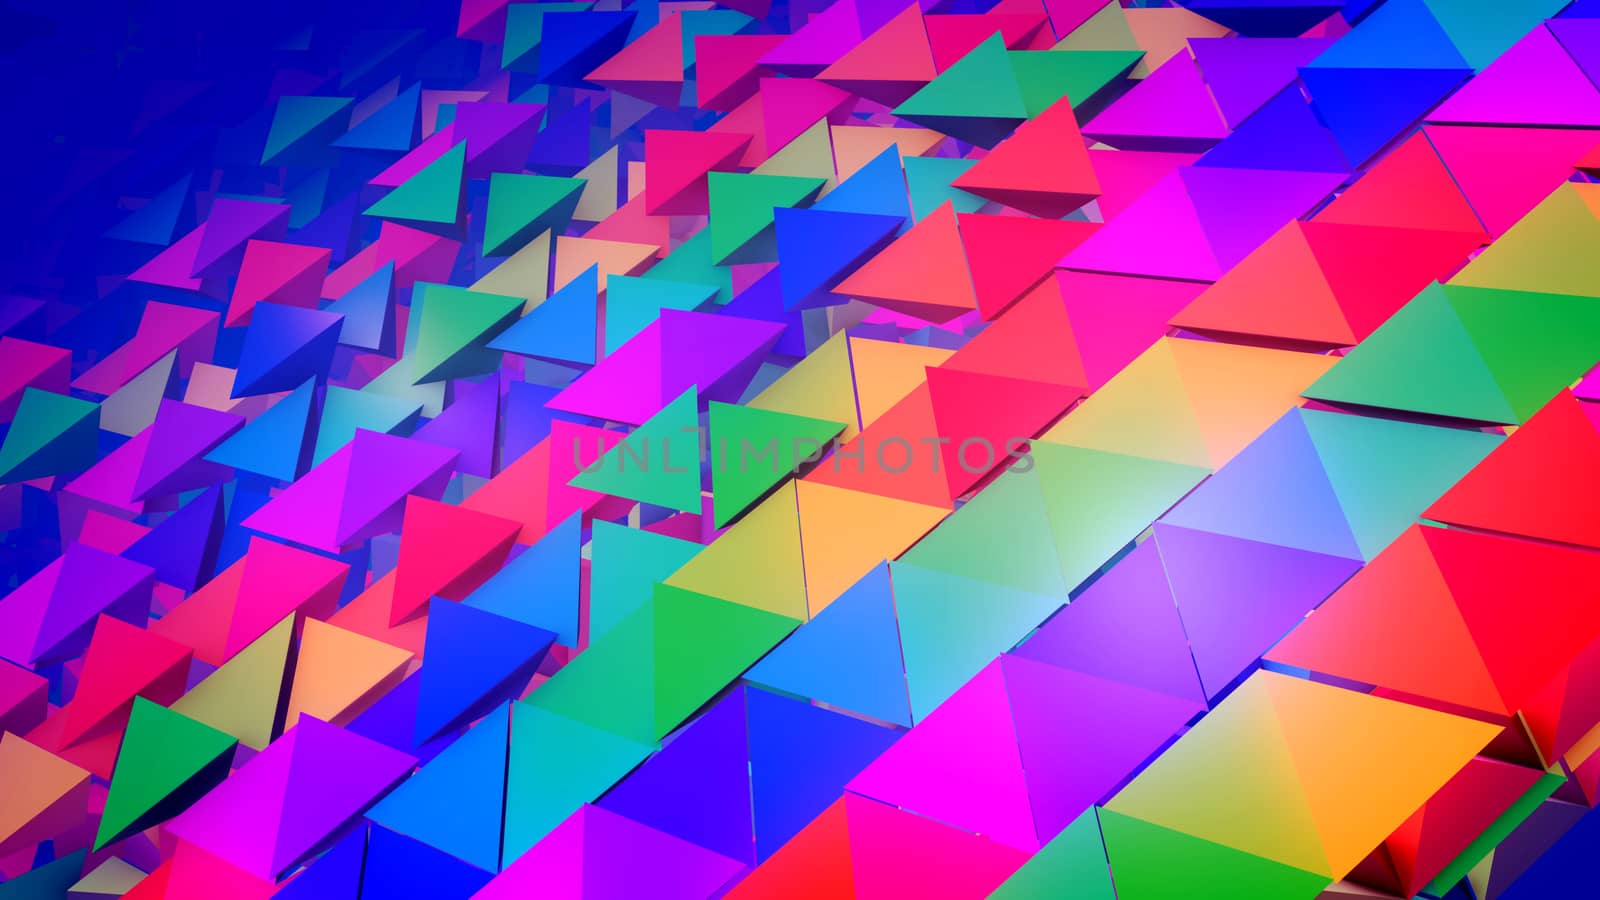 Wonderful 3d illustration of colorful pyramids located diagonally in straight and long rows as if a group of kids placed them with bottoms up. It looks childish, optimistic, and advanced.